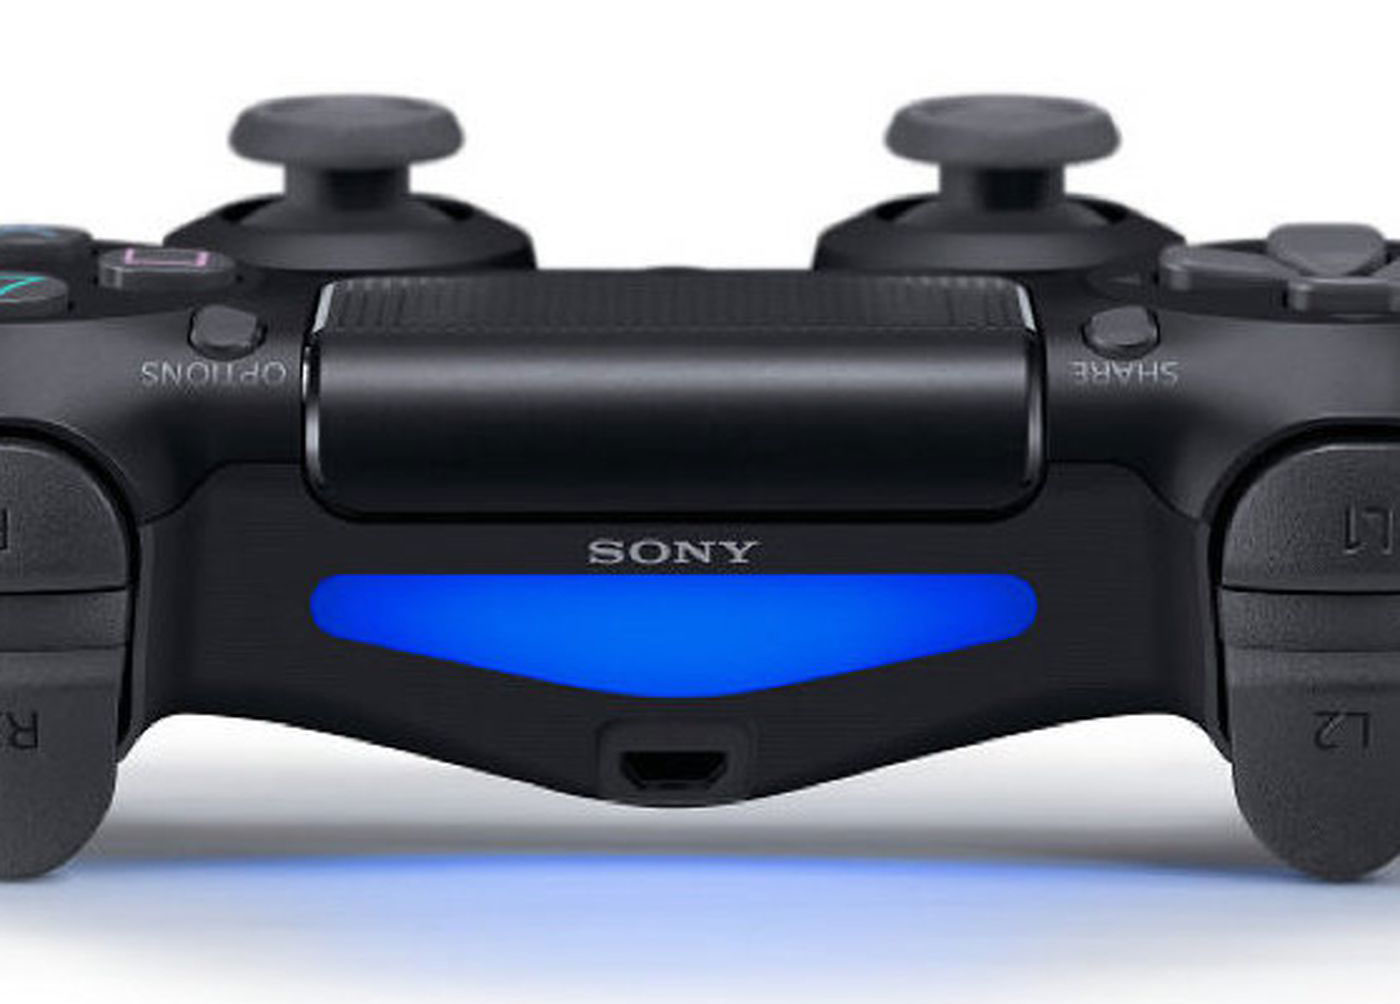 Sony Gets Patent for a New PlayStation Controller Design Features Images